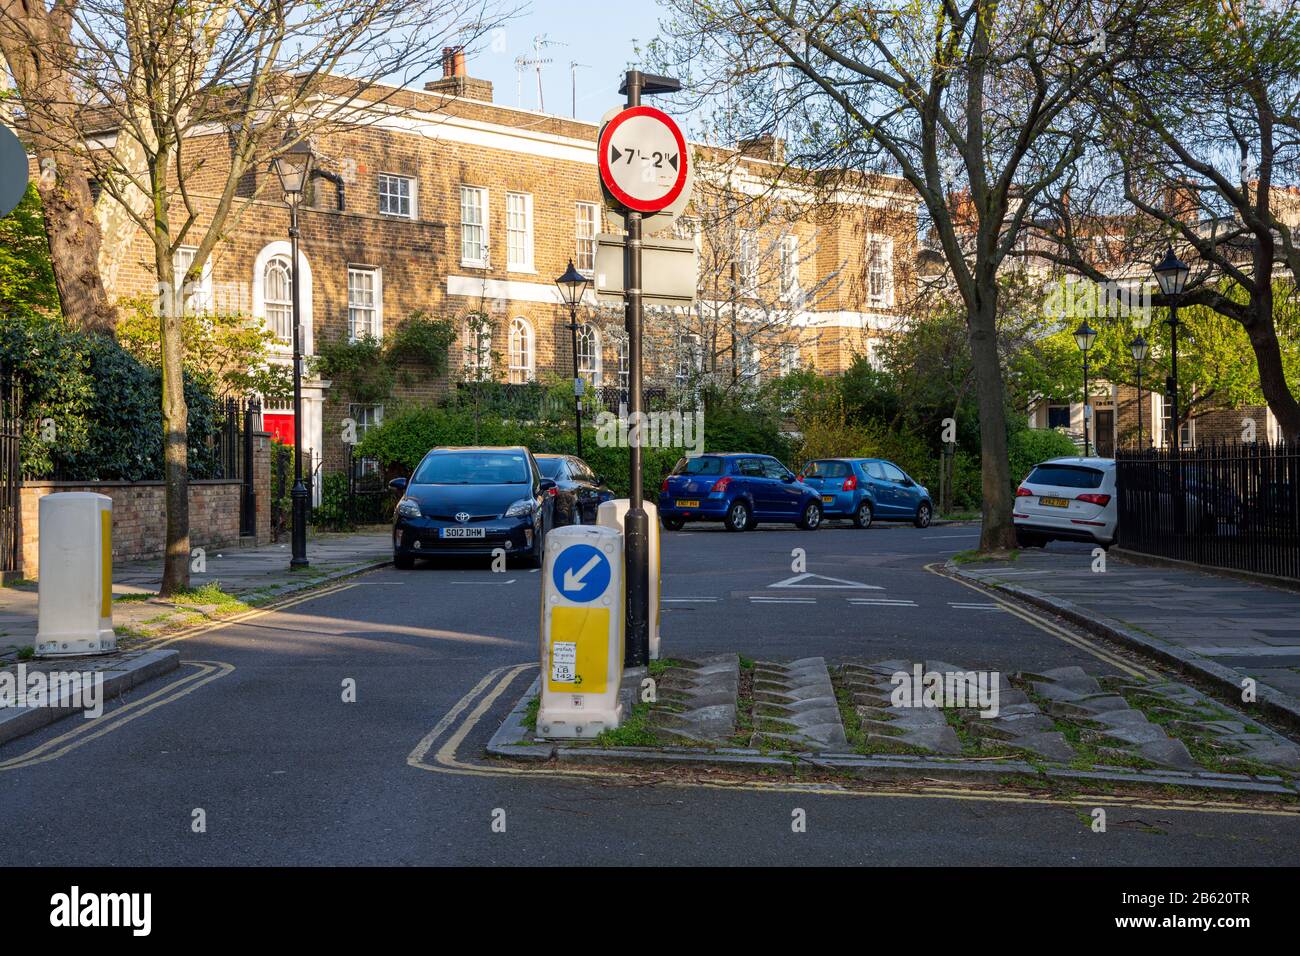 London, England, UK - April 11, 2019: An example of a traffic calming and filtering feature, restricting wide vehicles from a residential area, while Stock Photo